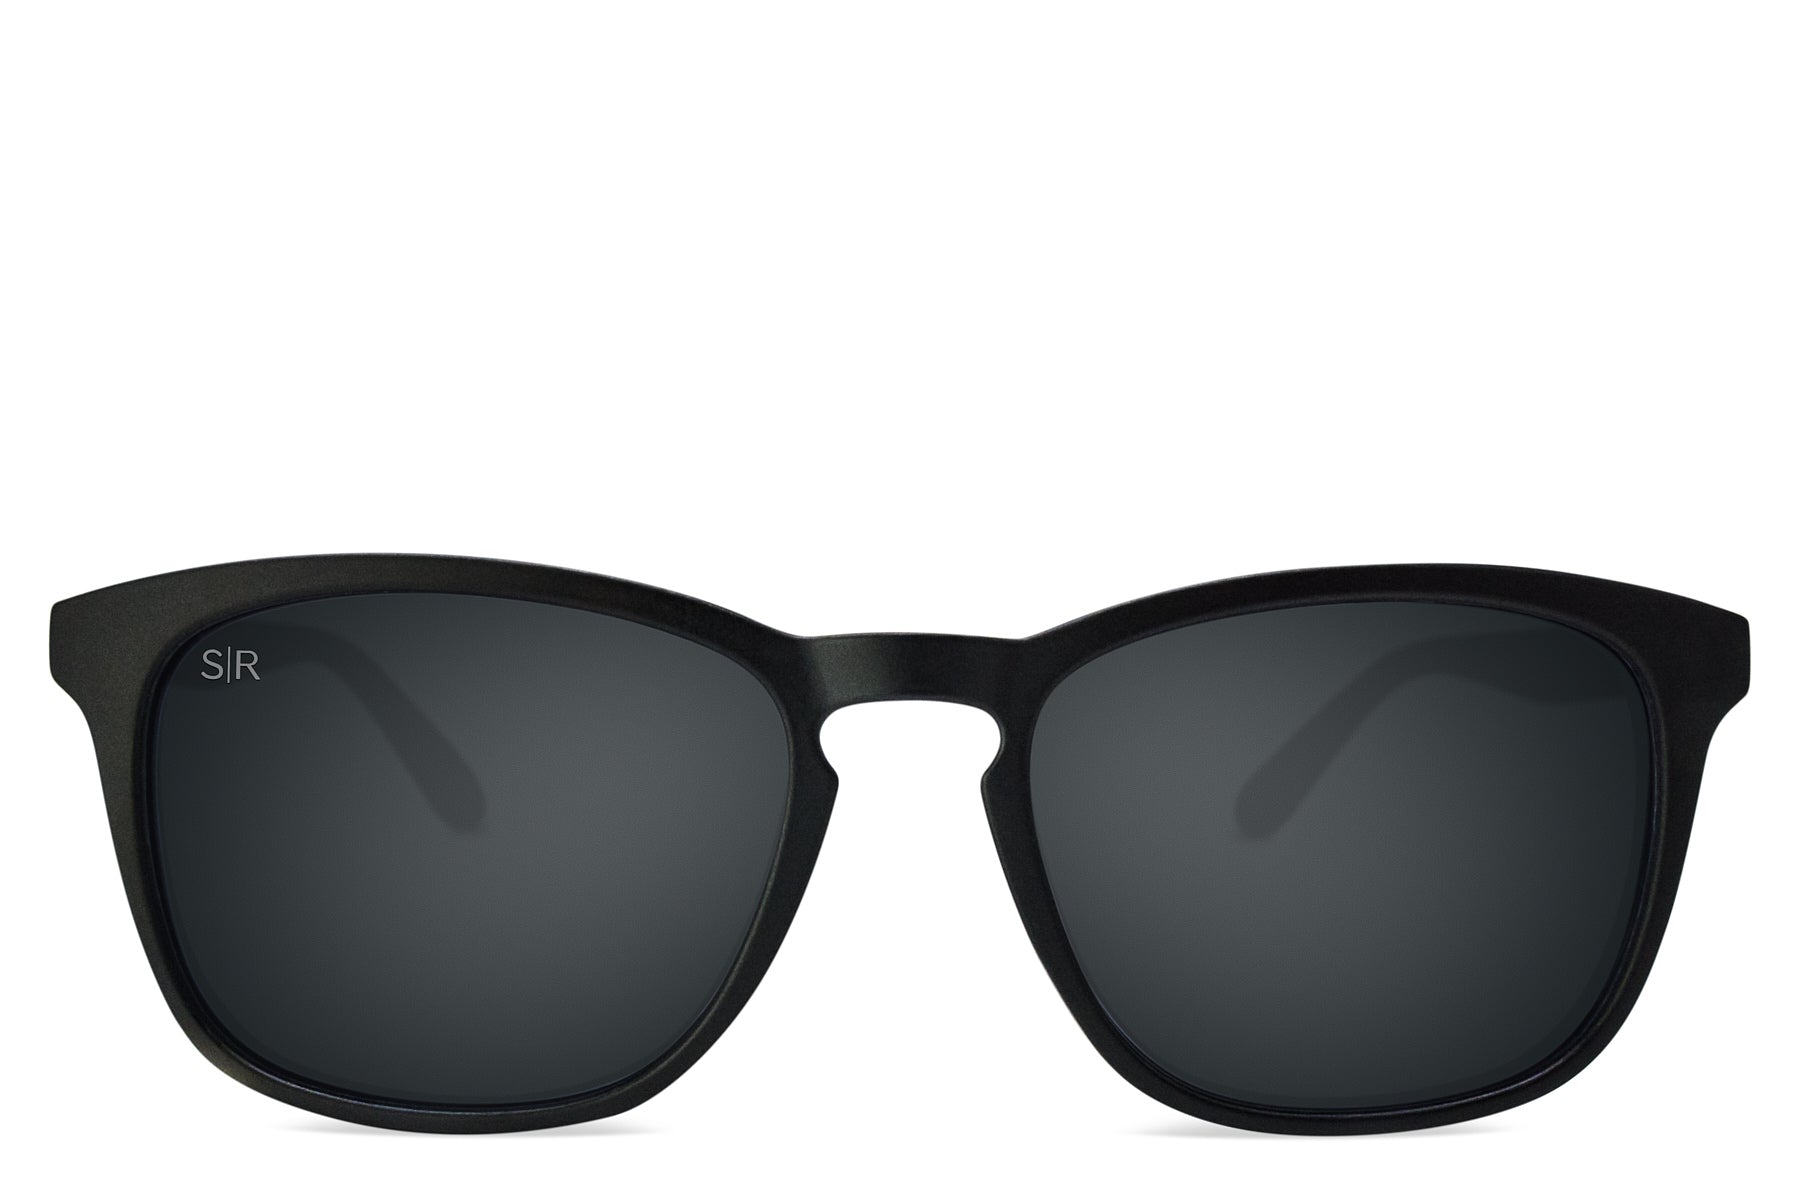 Cypress - Blackout Polarized Sunglasses | Black Sunglasses | Best Christmas Gifts | Gifts for the Holidays | Unique Gifts for Friends| Shady Rays